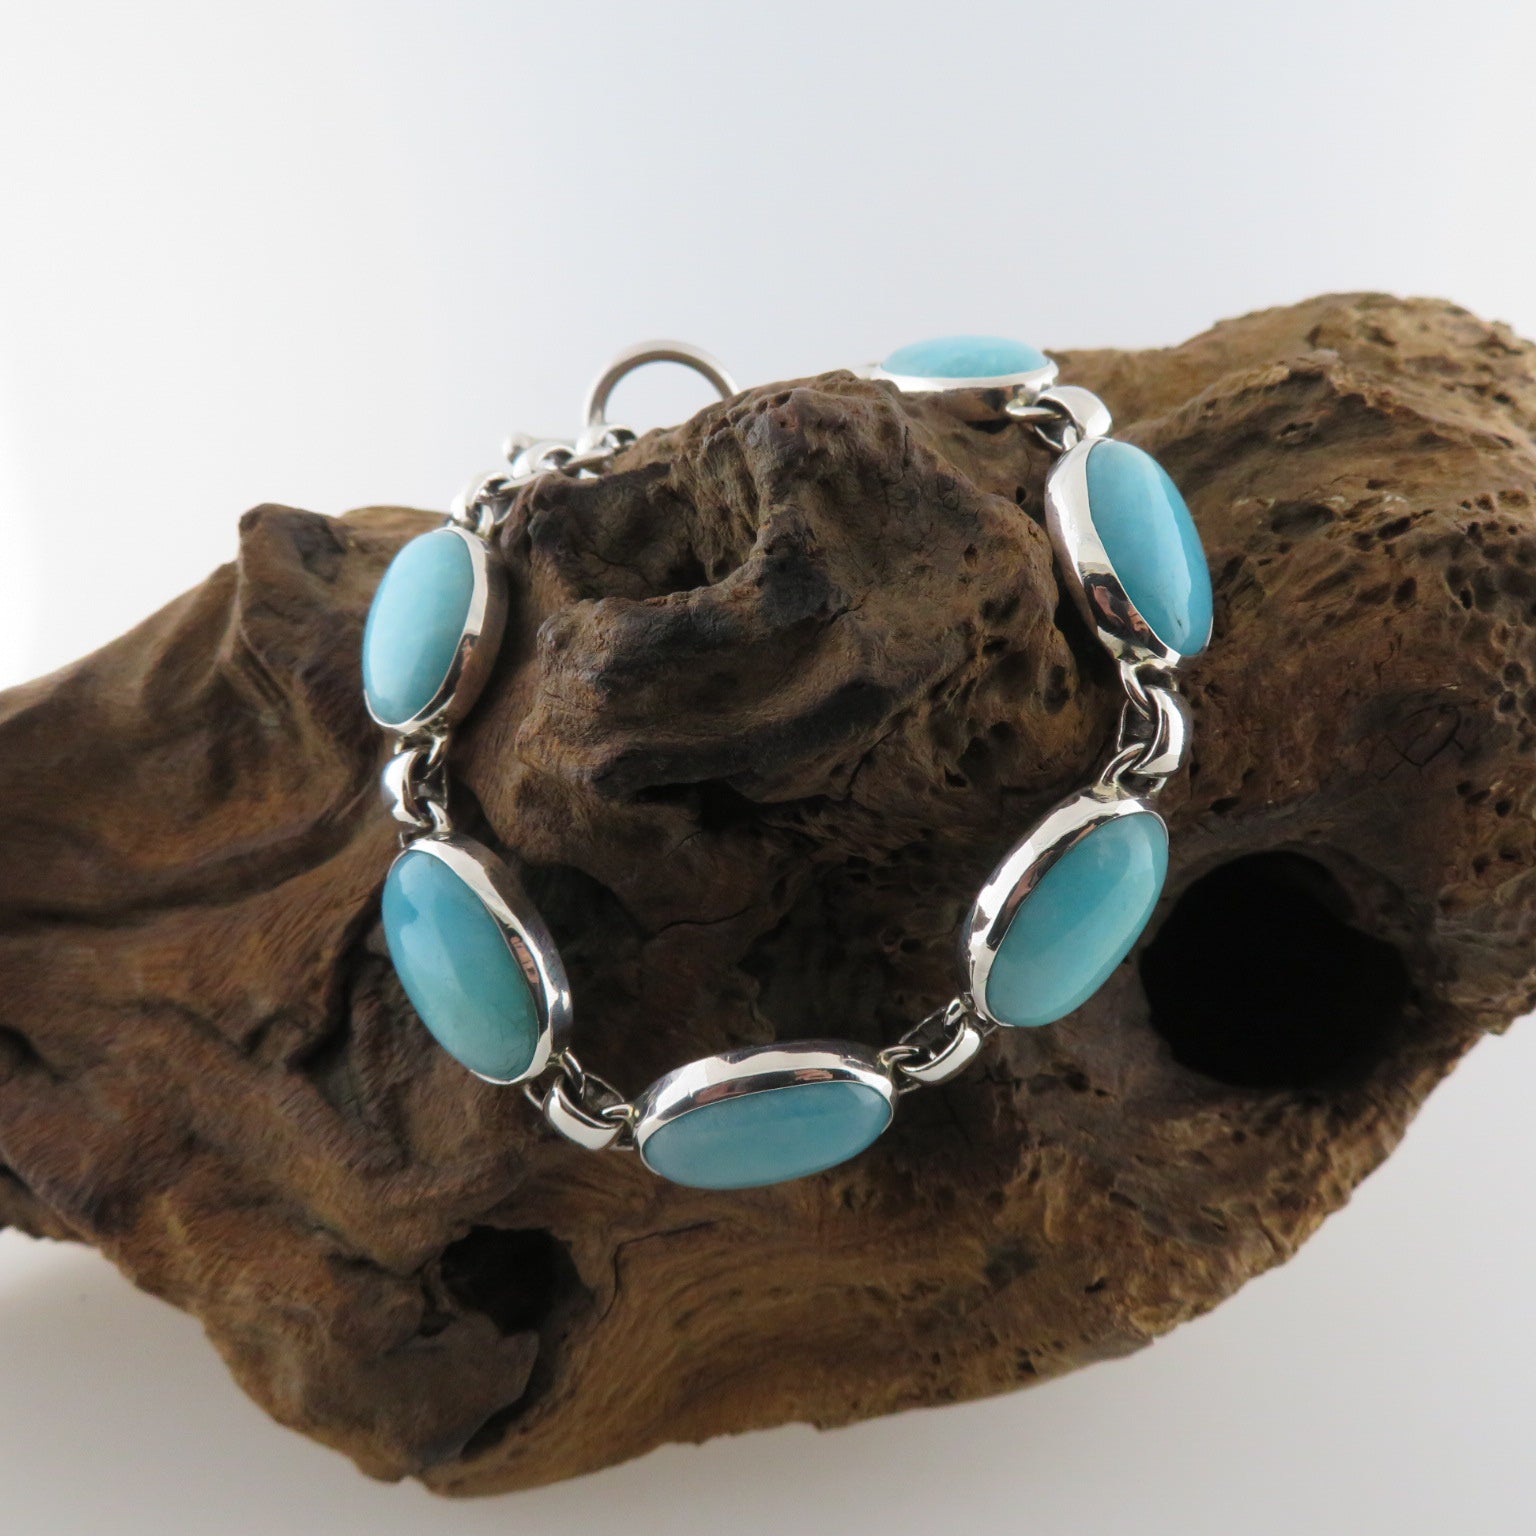 Amazonite Bracelet with Sterling Silver